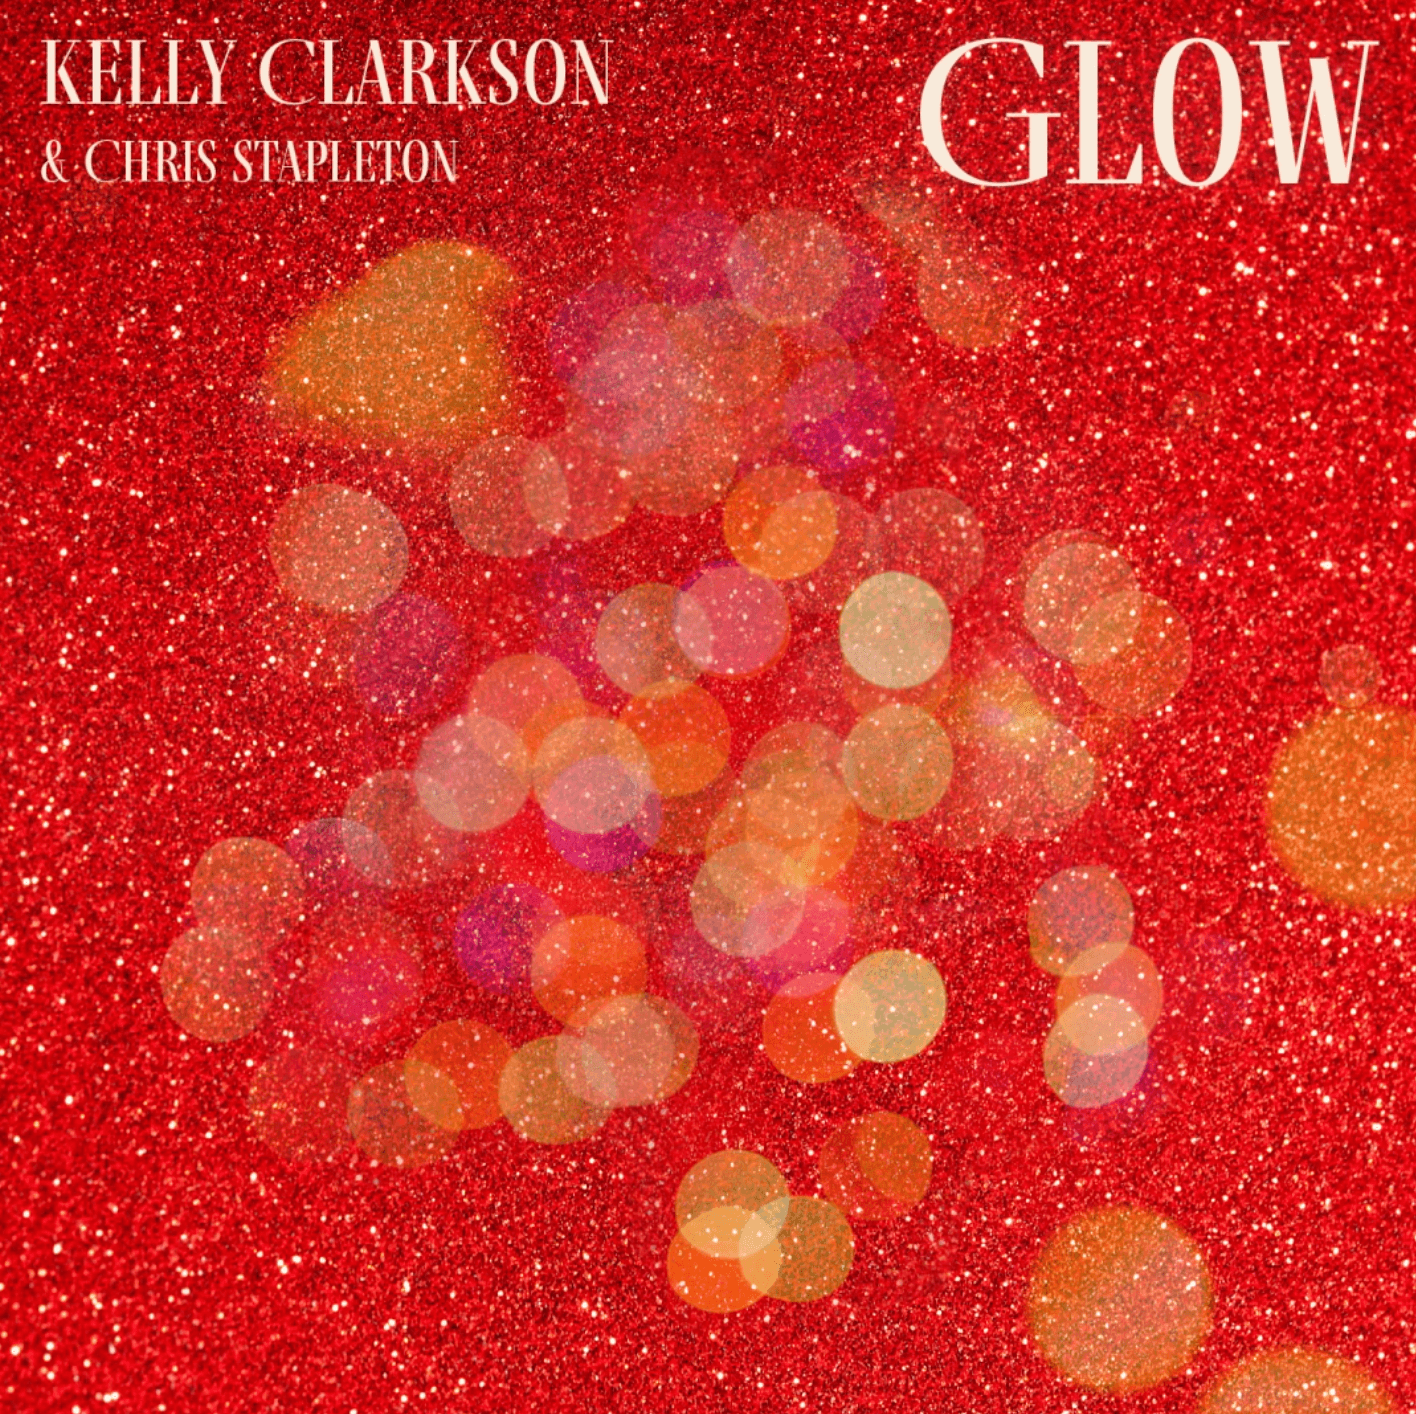 Kelly Clarkson Releases New Christmas Song "Glow" Featuring Chris